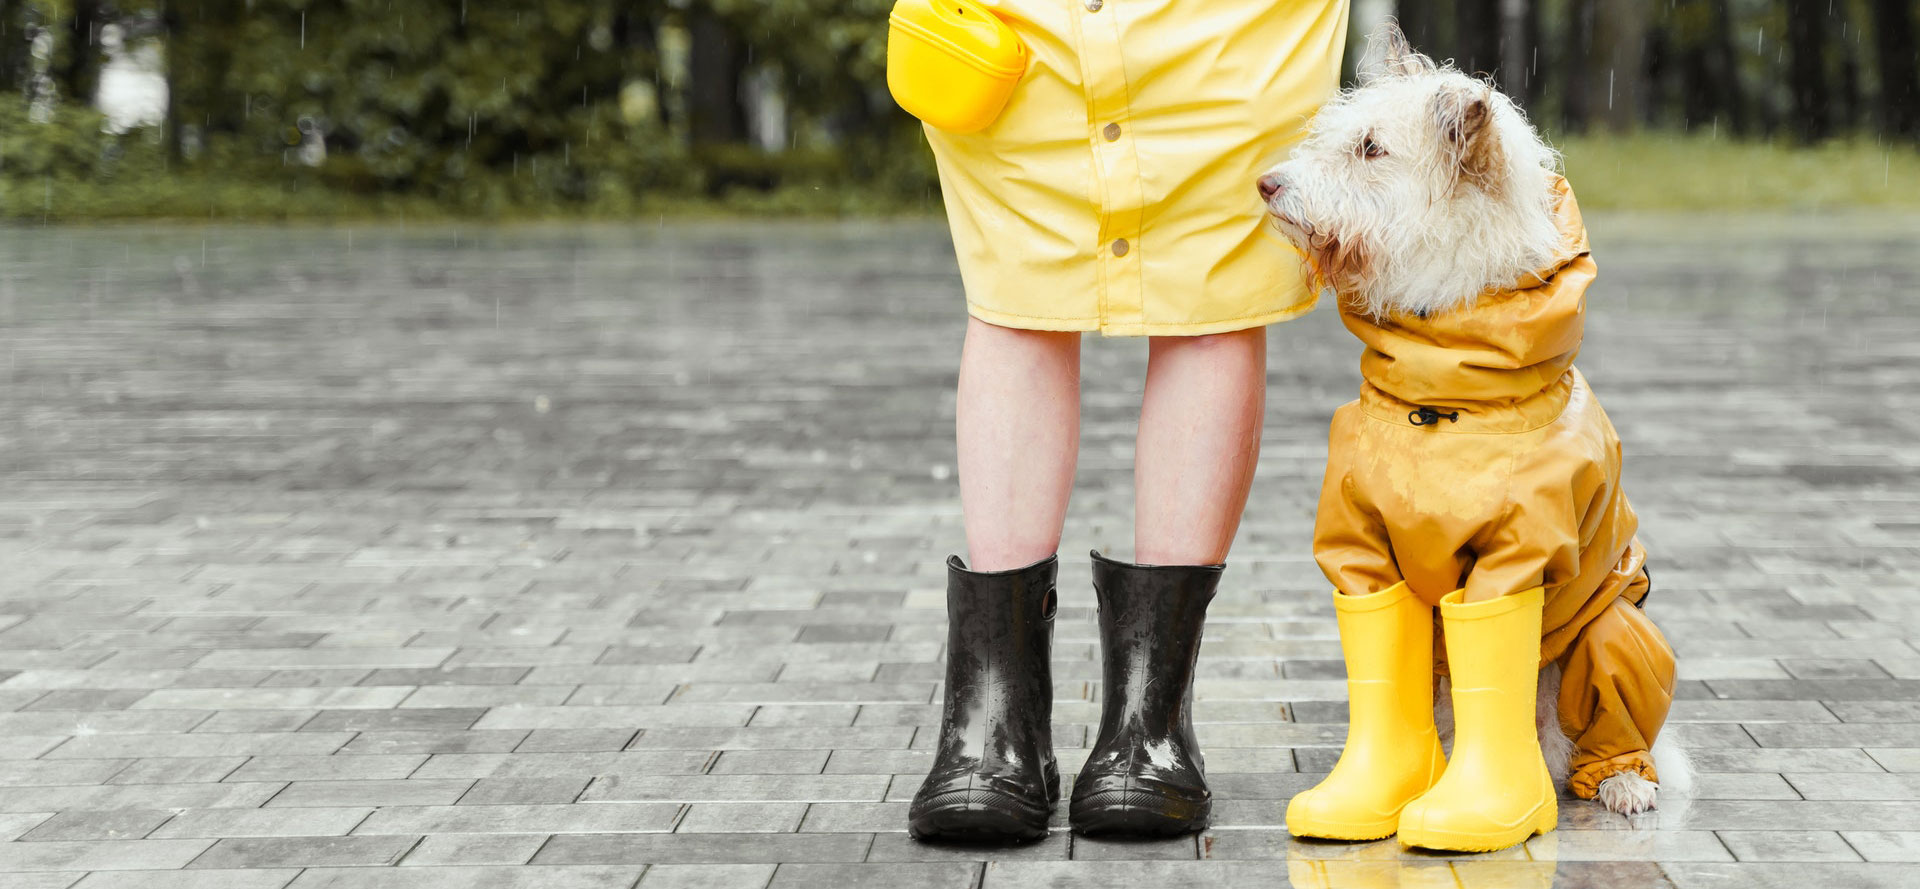 Dog in raincoat and boots.